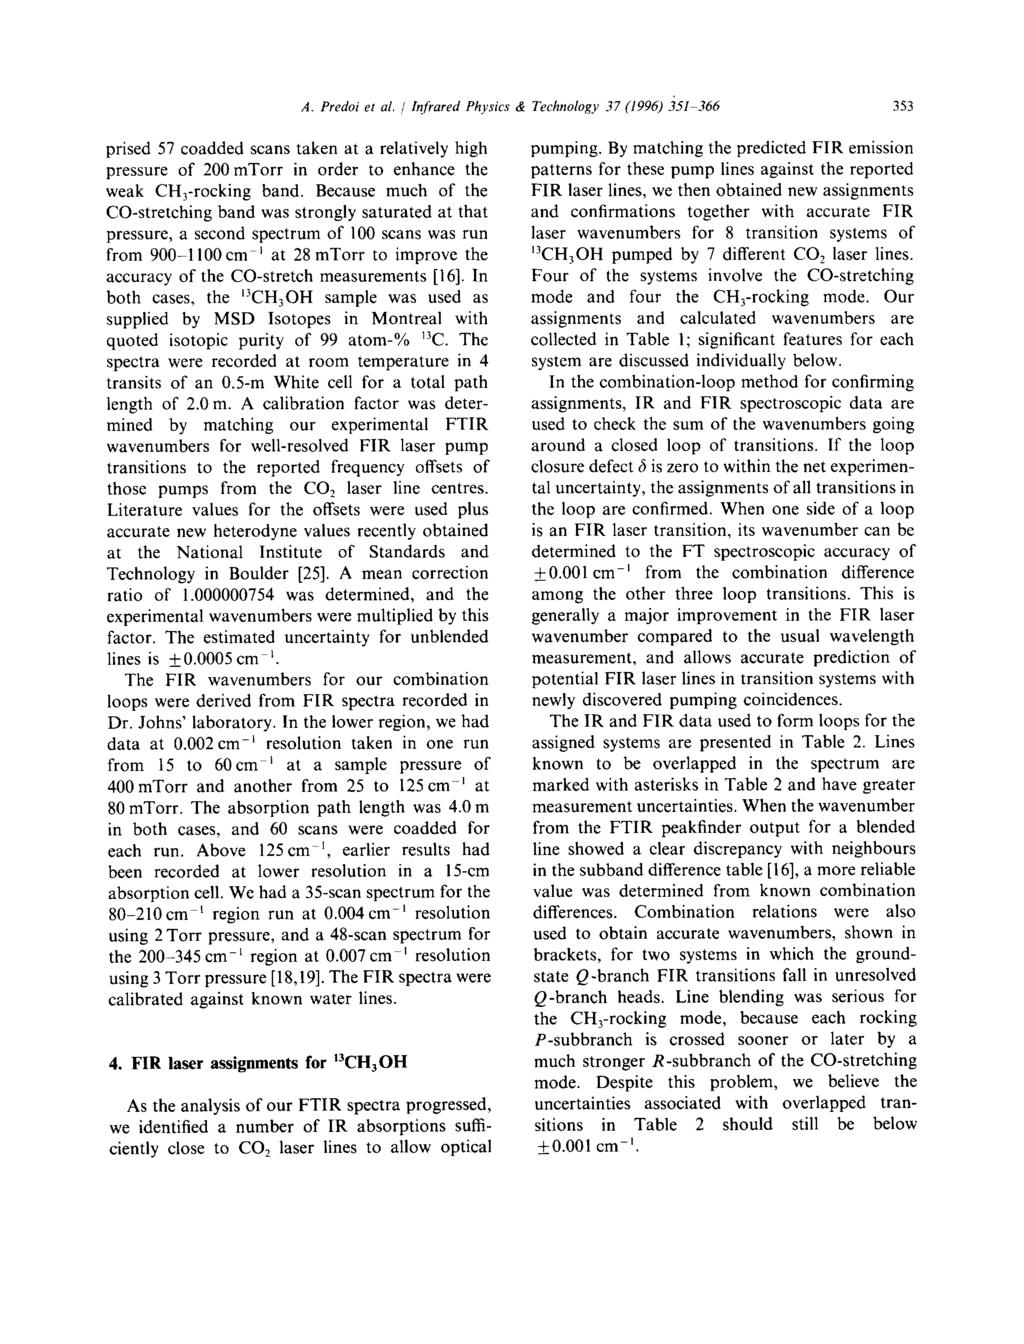 A. Predoi et al. / Infrared Physics & Technology 37 (1996) 351-366 353 prised 57 coadded scans taken at a relatively high pressure of 200mTorr in order to enhance the weak CH3-rocking band.